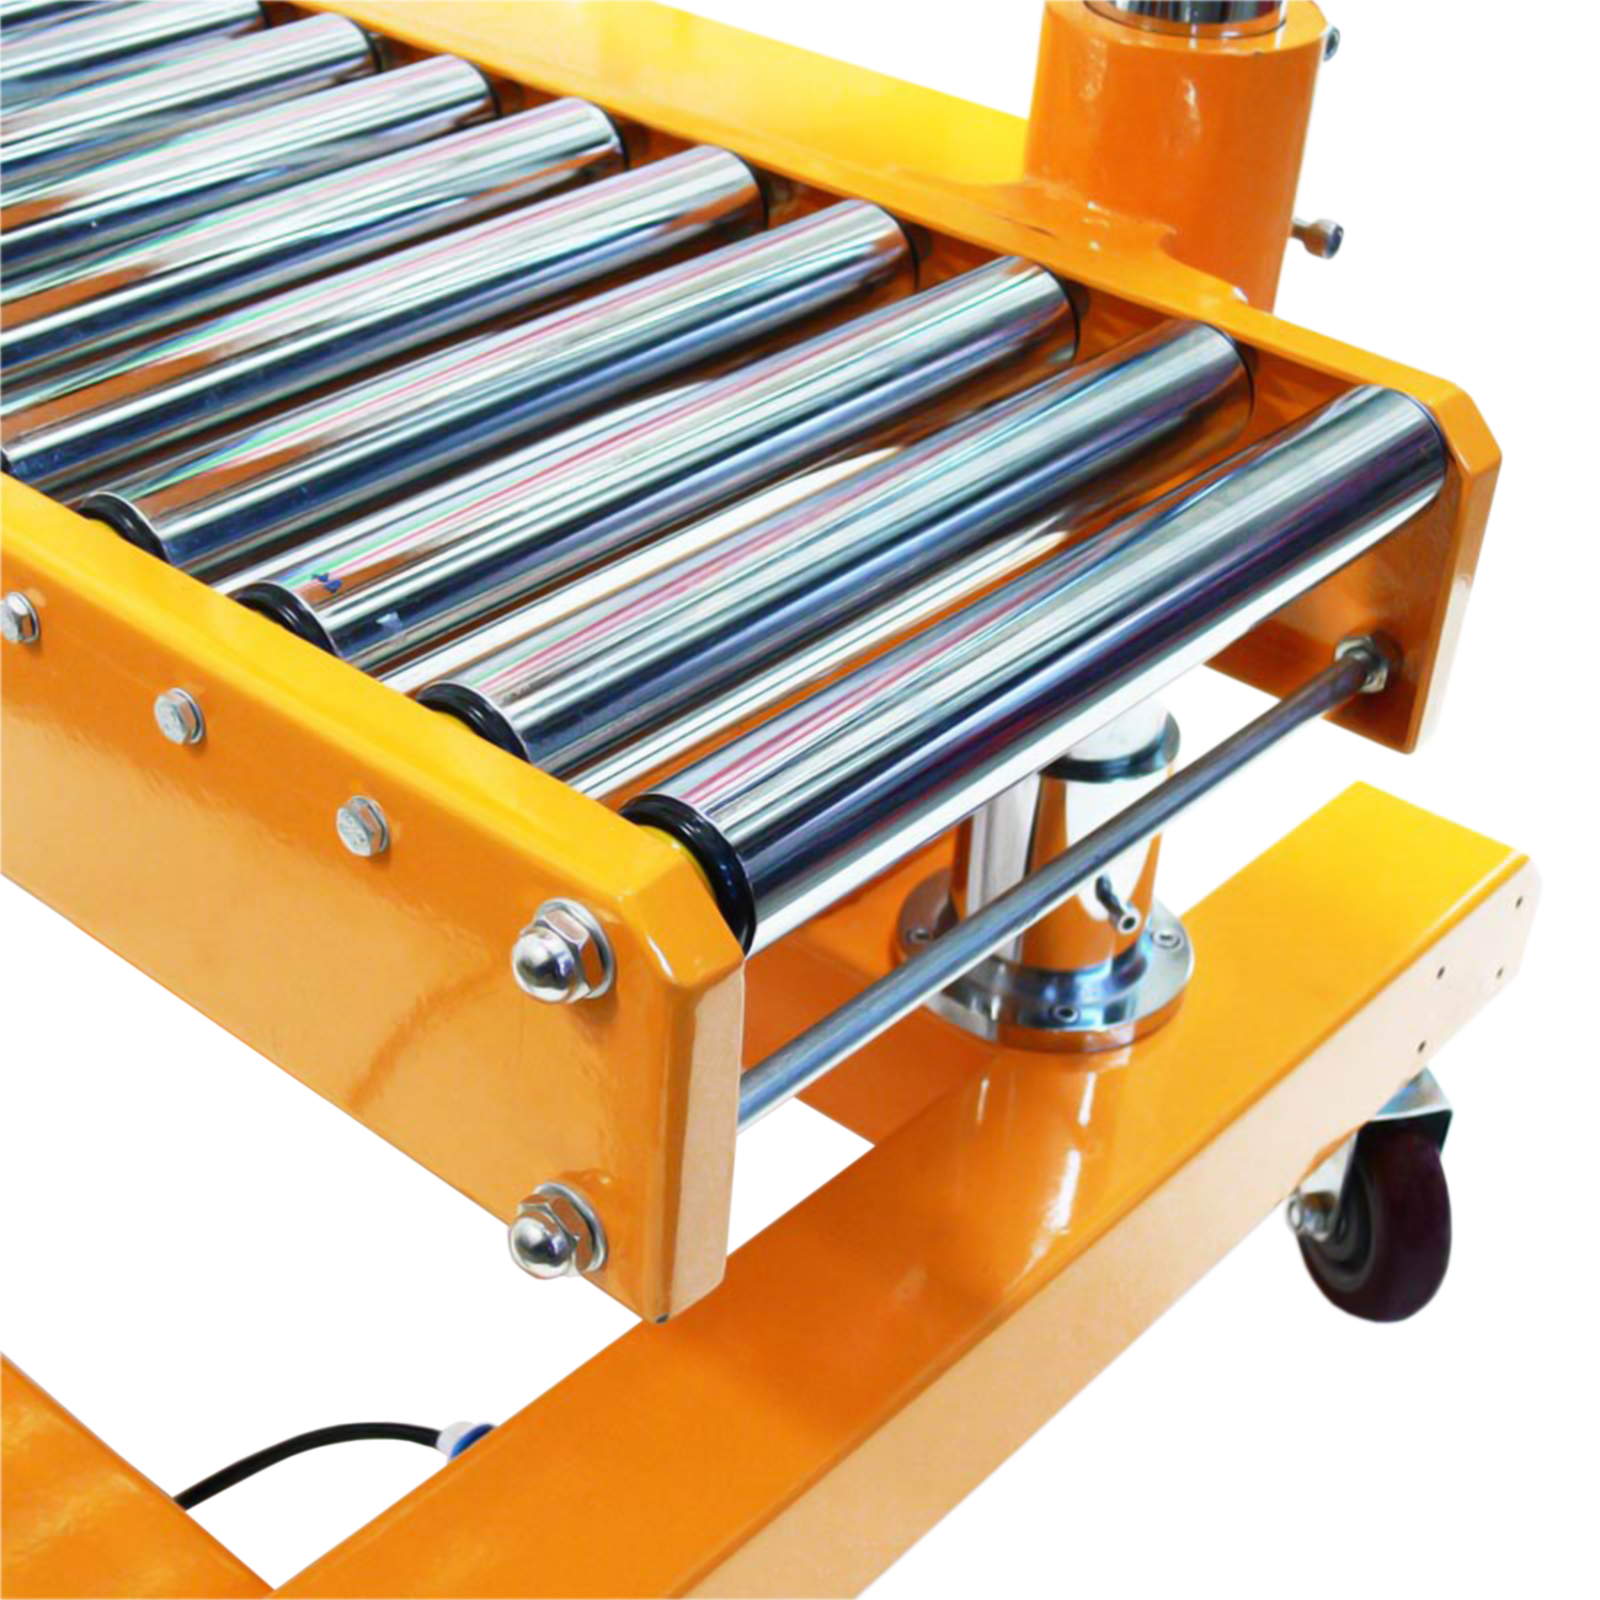 Detail of a foot impulse heat sealer with roller conveyor and swiveling breaking caster wheels.